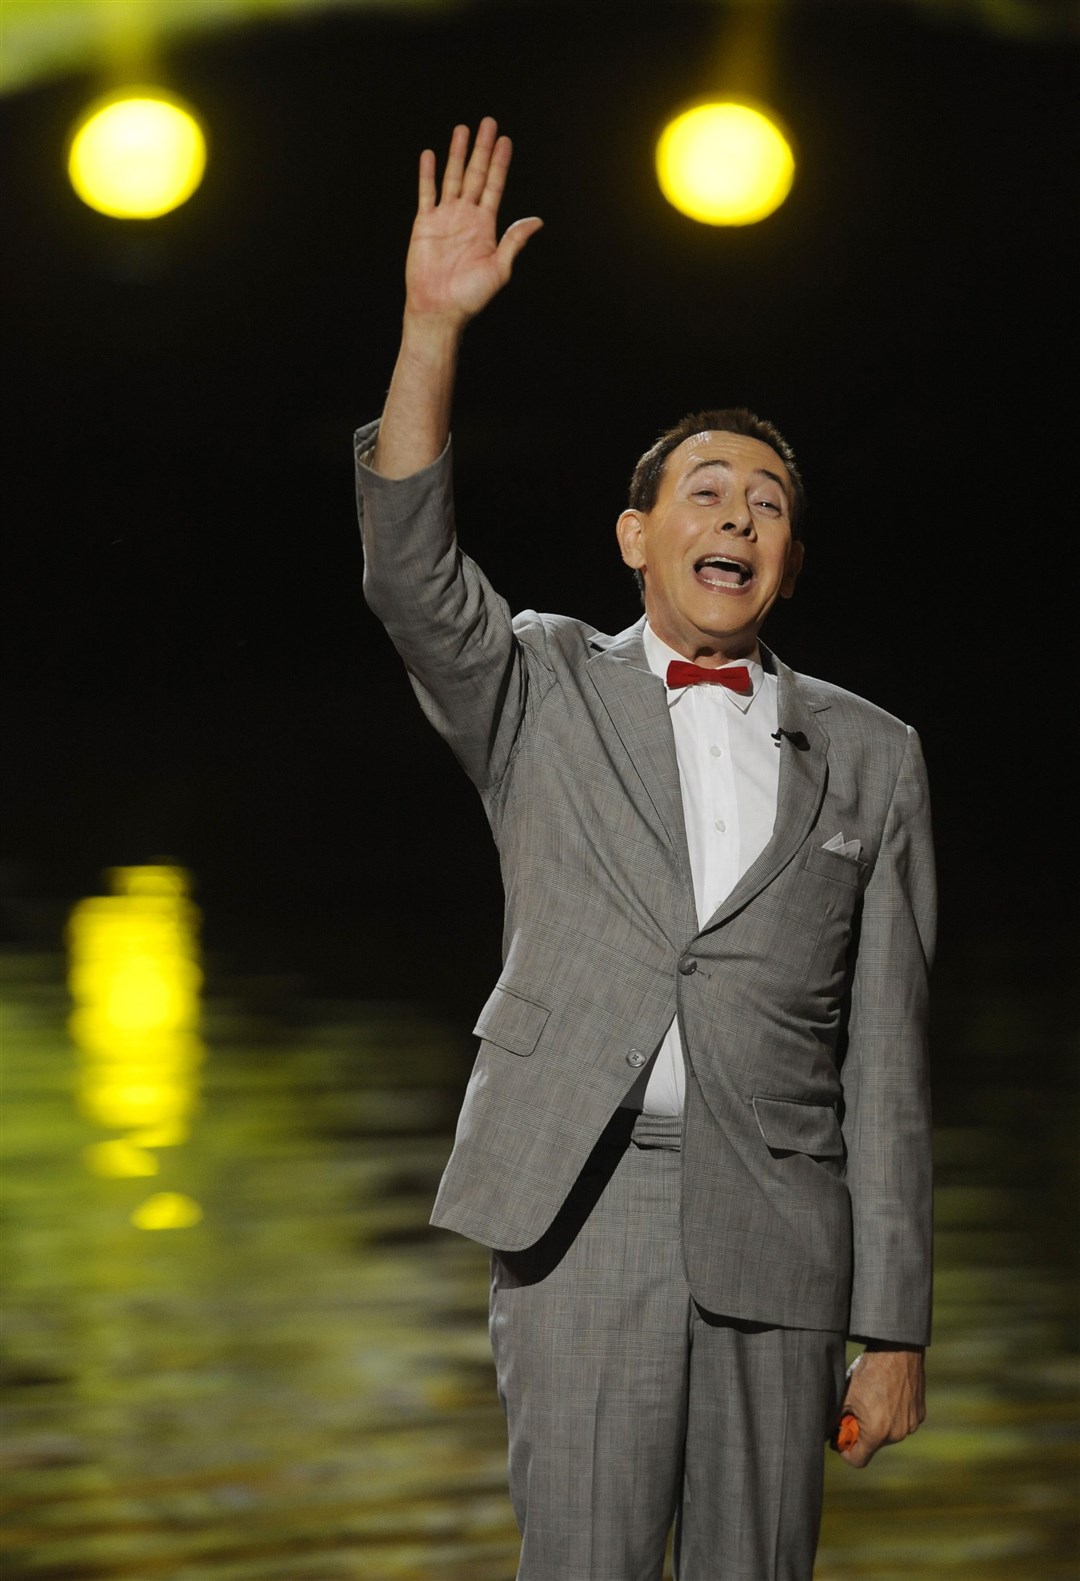 Paul Reubens, in character as Pee-wee Herman, waves to the crowd (Chris Pizzello/AP)